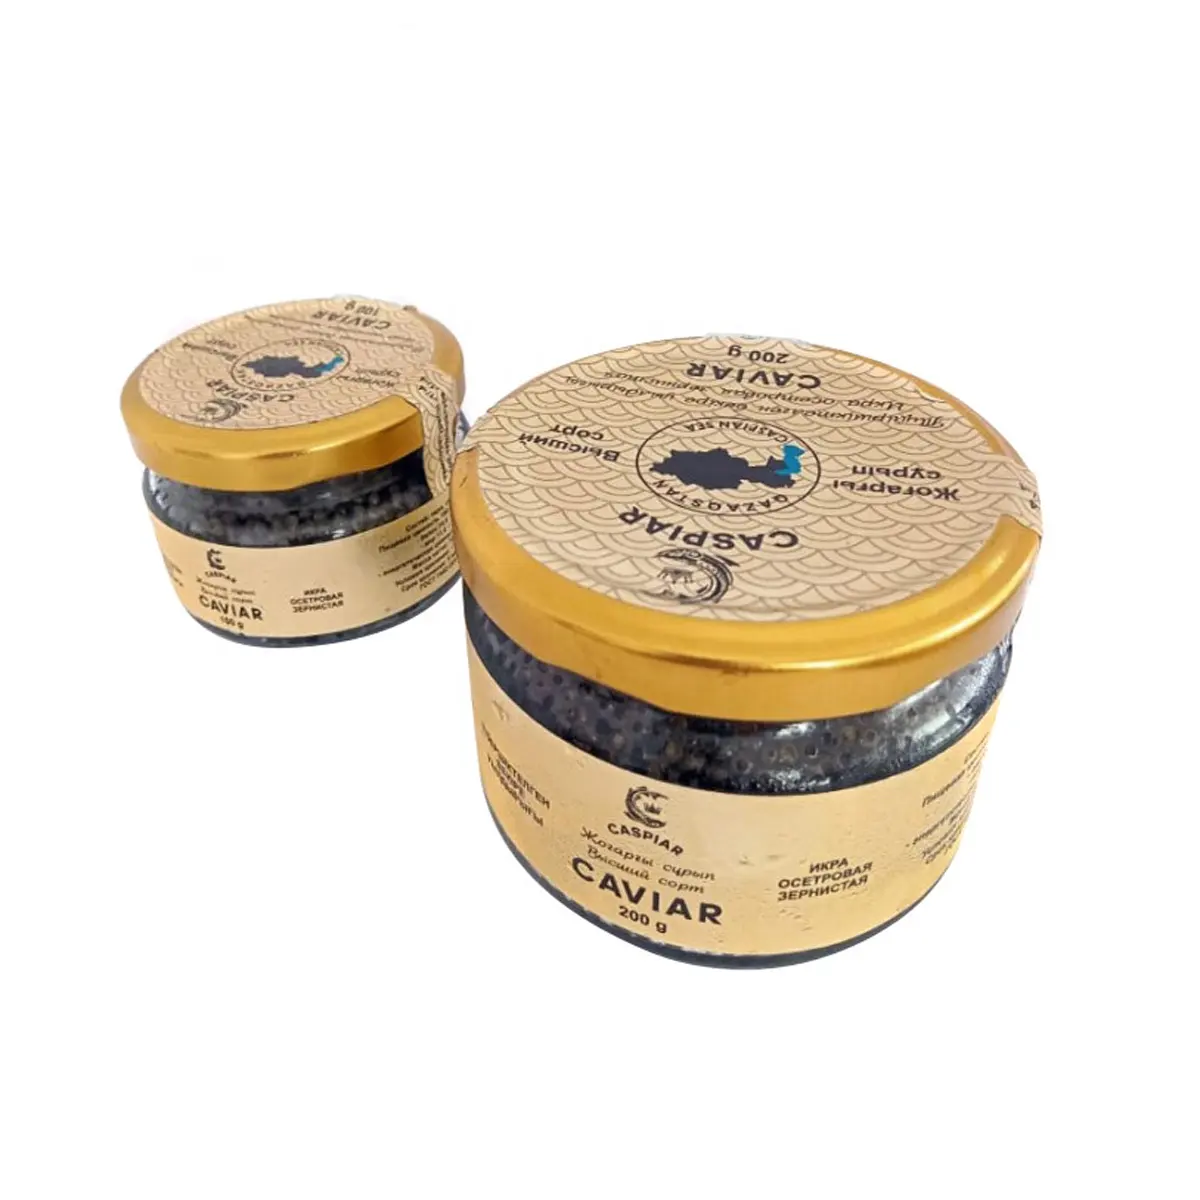 Culinary delight sturgeon caviar pre-packed in glass jar